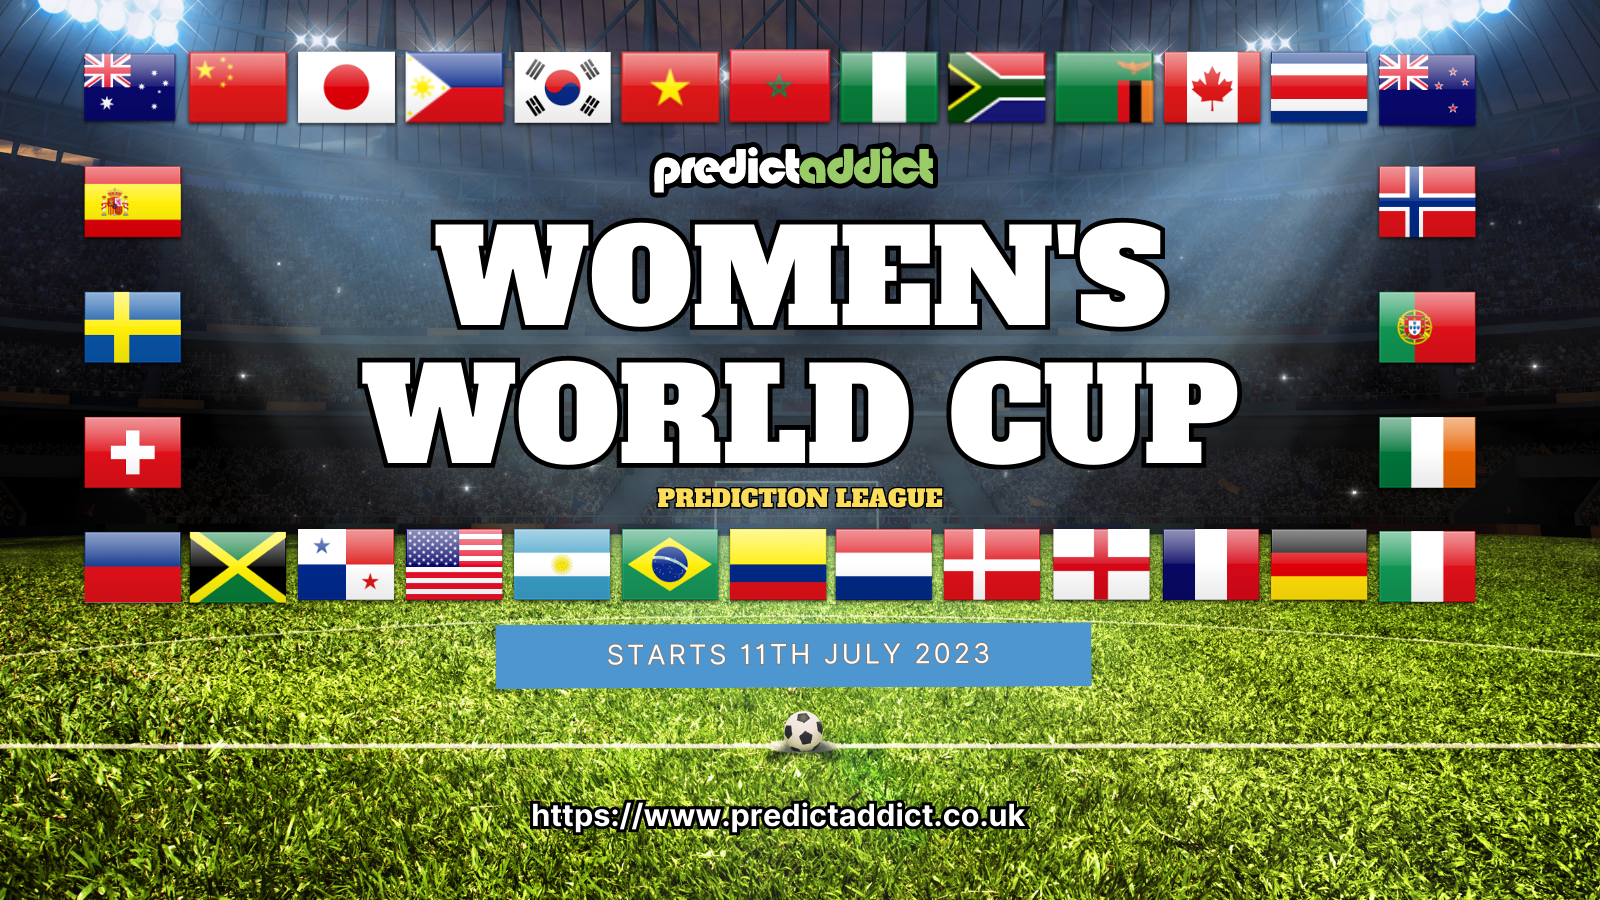 All participating country flags for the Women's World Cup 2023 in a square on a half of a football pitch surrounding the announcement of Predict Addict's Women's World Cup 2023 prediction league